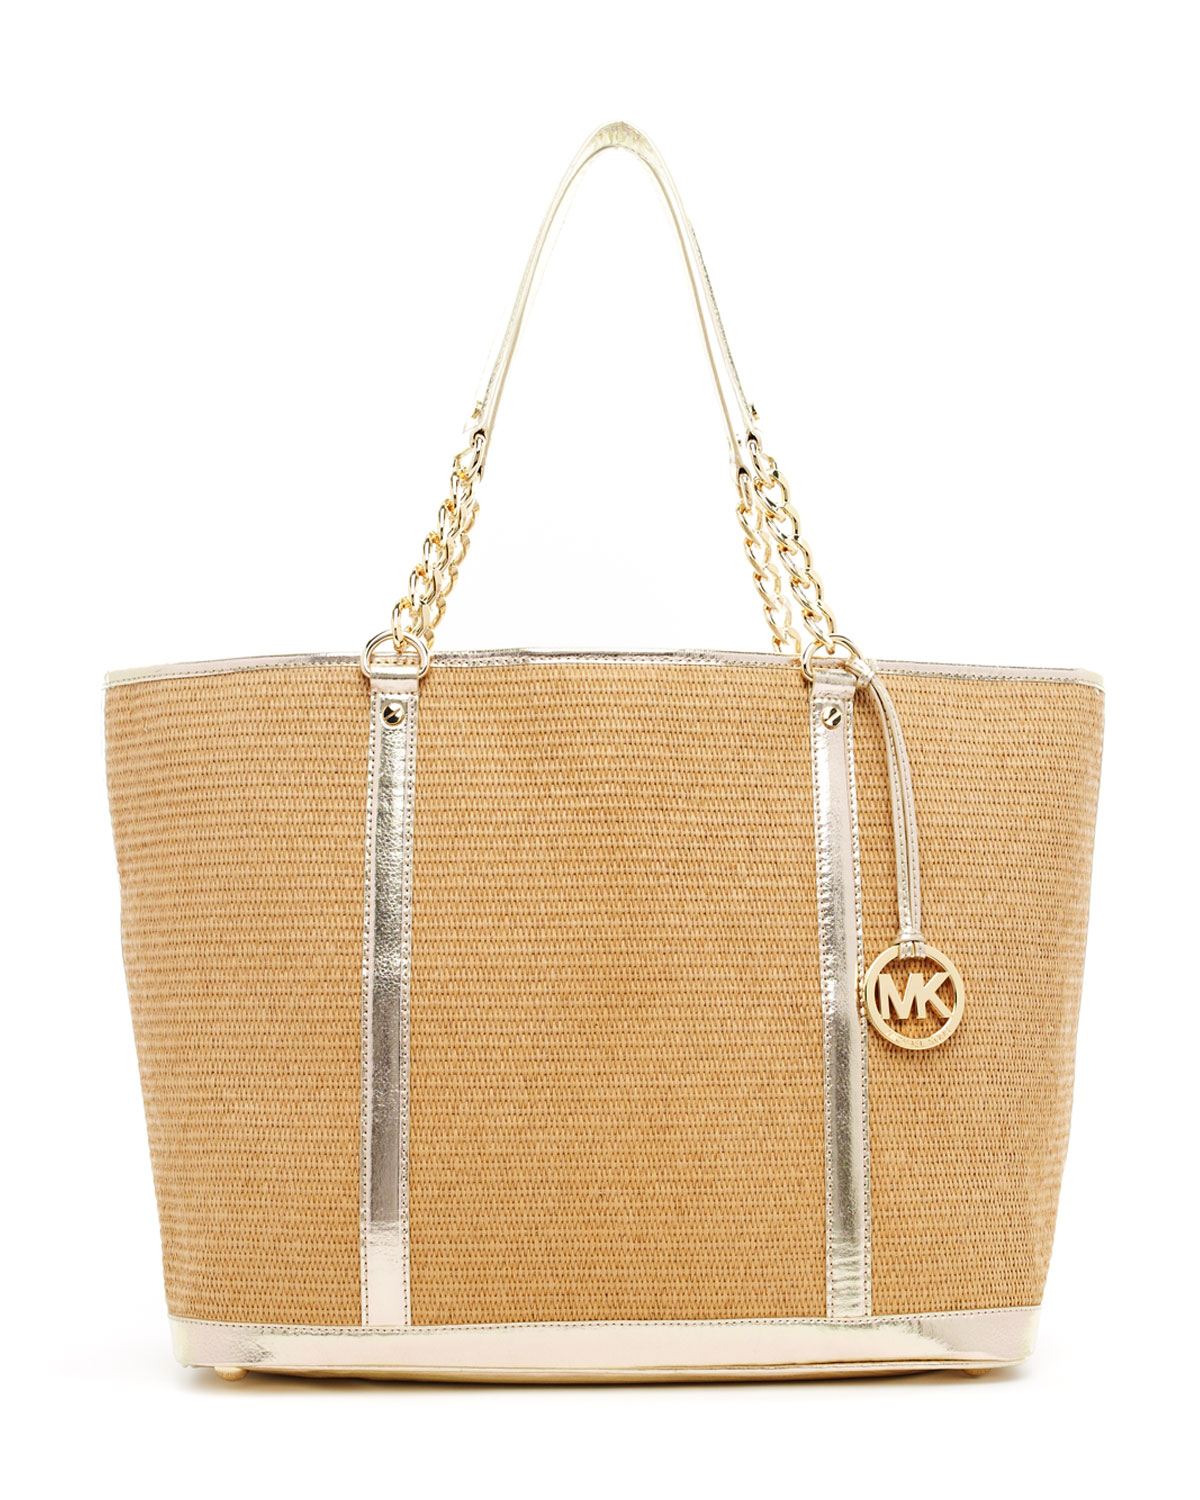 Lyst - Michael Kors Amagansett Straw Tote in Natural